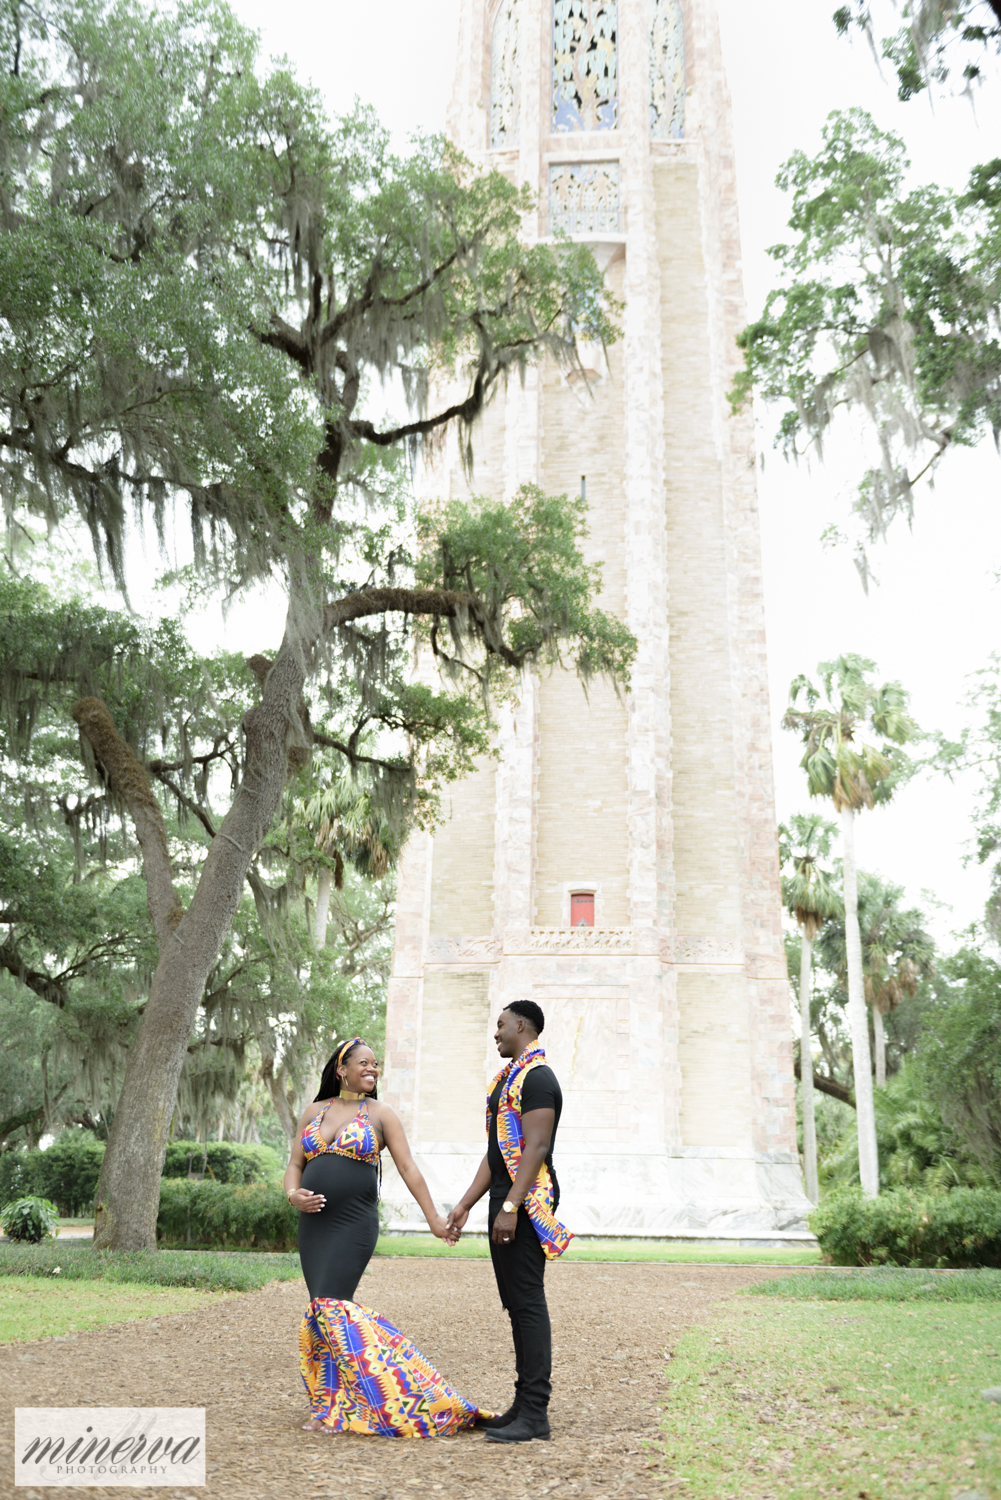 017_bok-tower-gardens_maternity-session_pregnancy-gown_portraits_orlando-photographer_orlando-family-baby-photography_goddess-dress_flower-crown